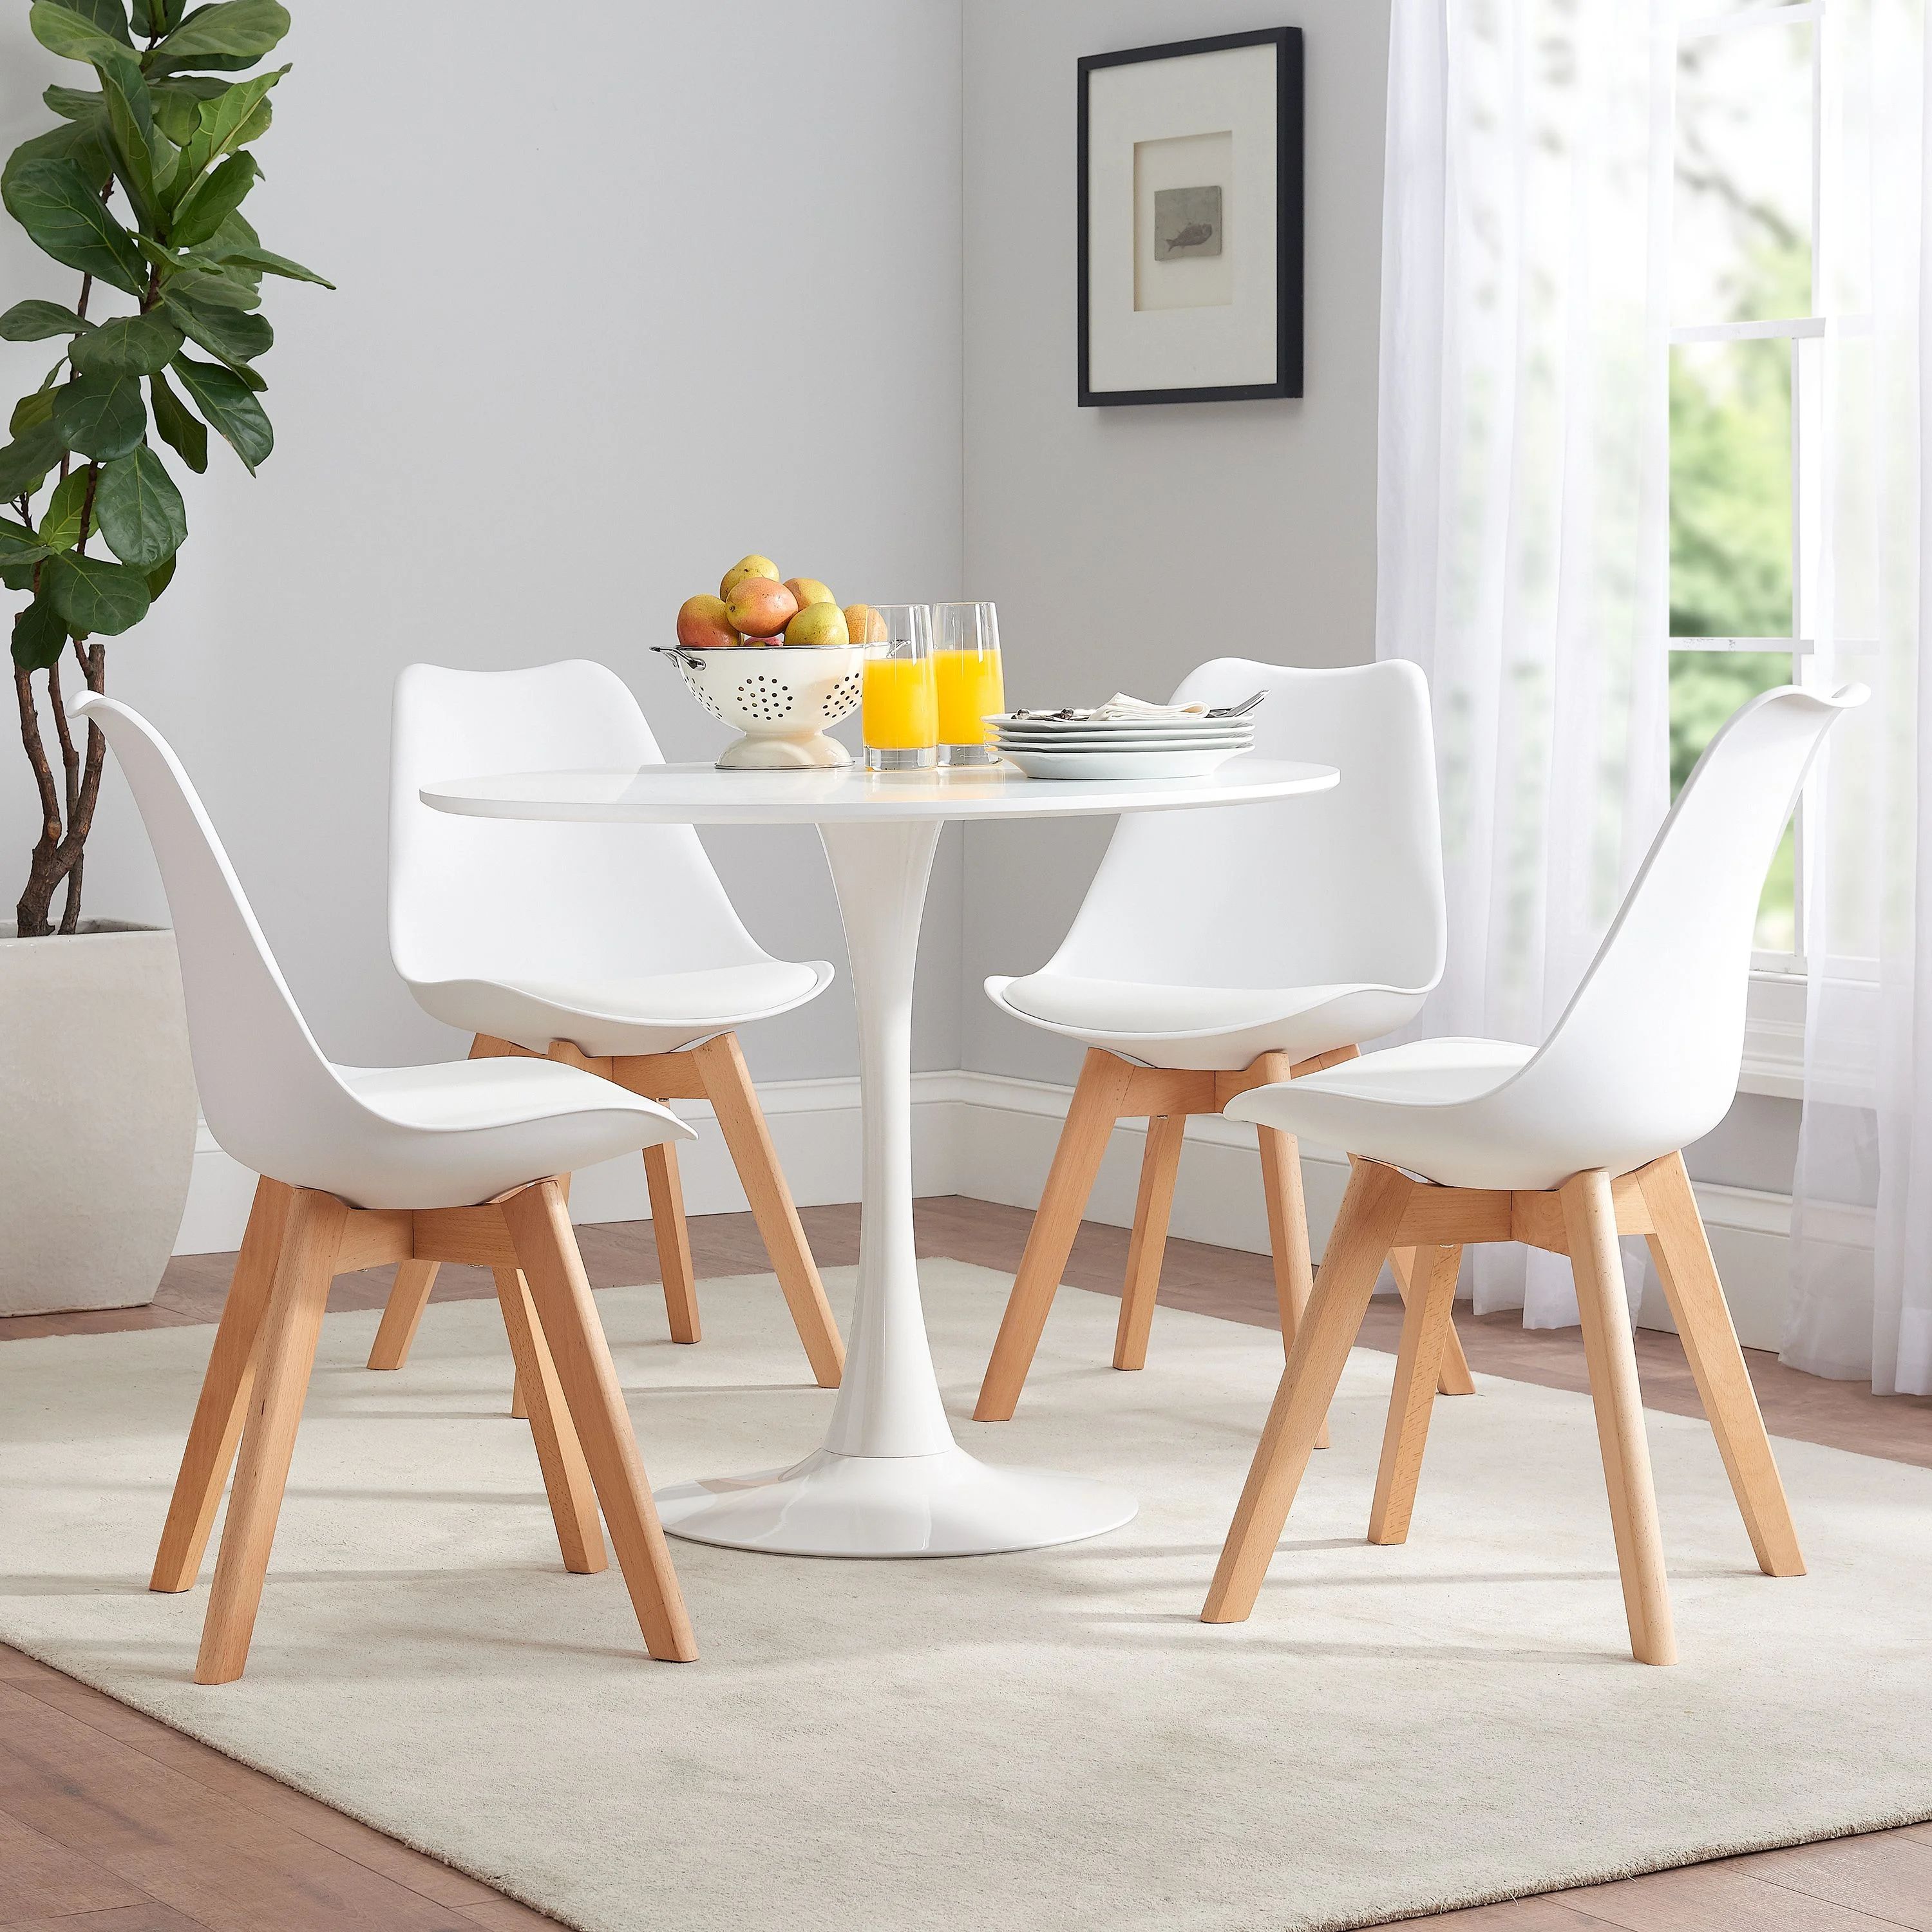 Mainstays Modern Bucket Seat Dining Chairs with Cushion, Set of 4, White with Natural Finish Legs | Walmart (US)